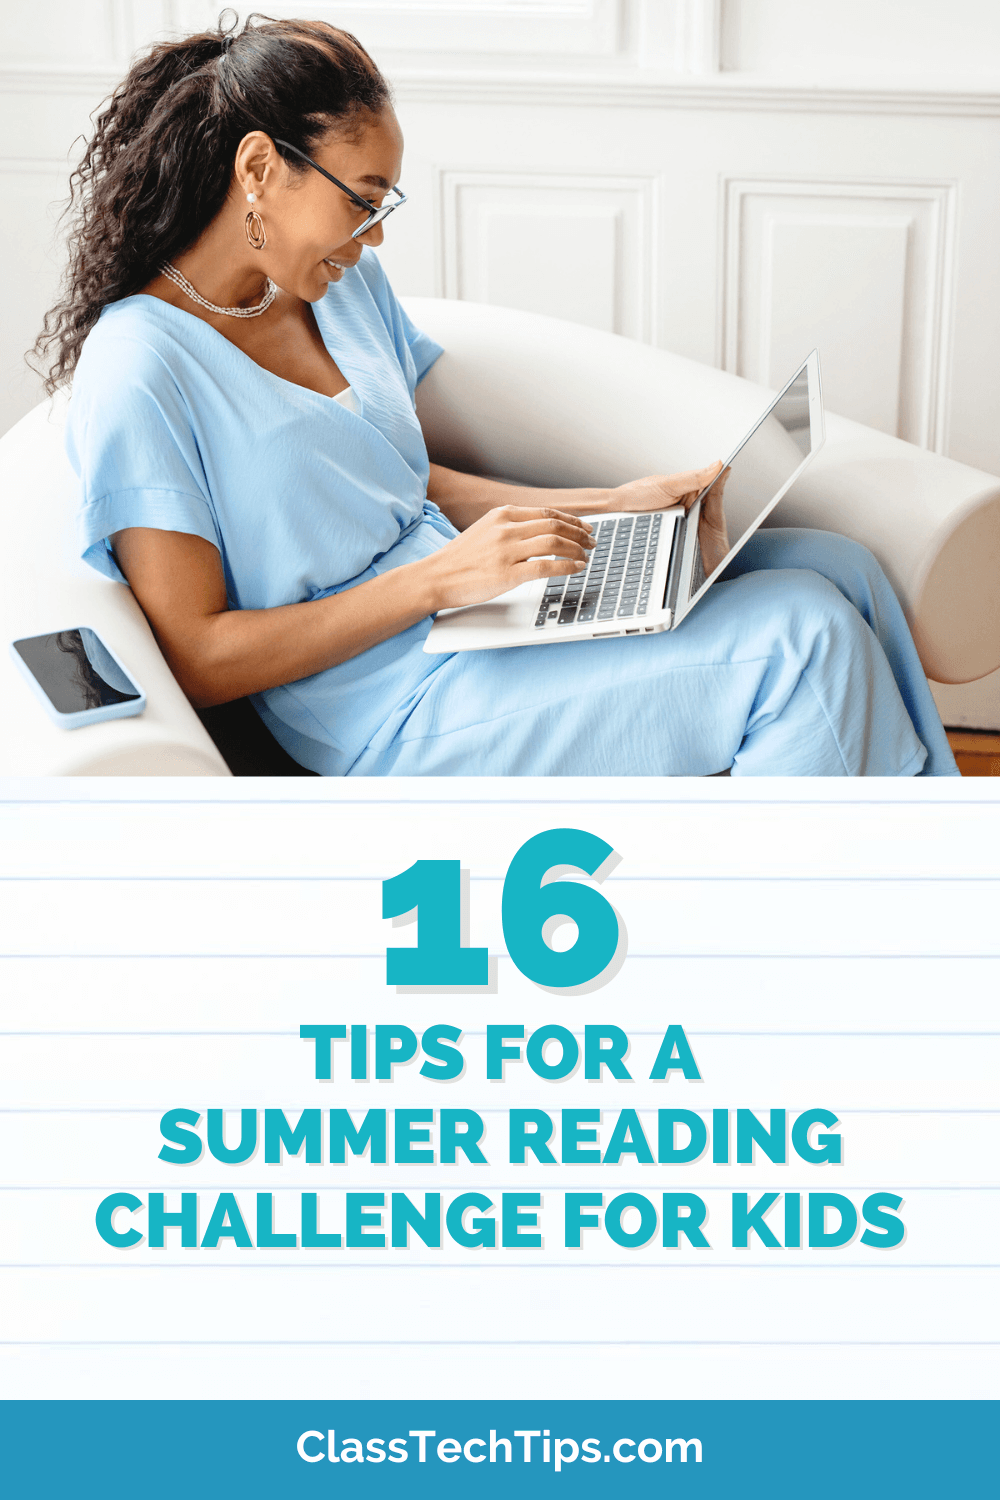 A smiling teacher wearing glasses and a blue dress is comfortably seated on a white couch, working on her laptop, next to text that reads "16 Tips for a Summer Reading Challenge for Kids" on ClassTechTips.com.